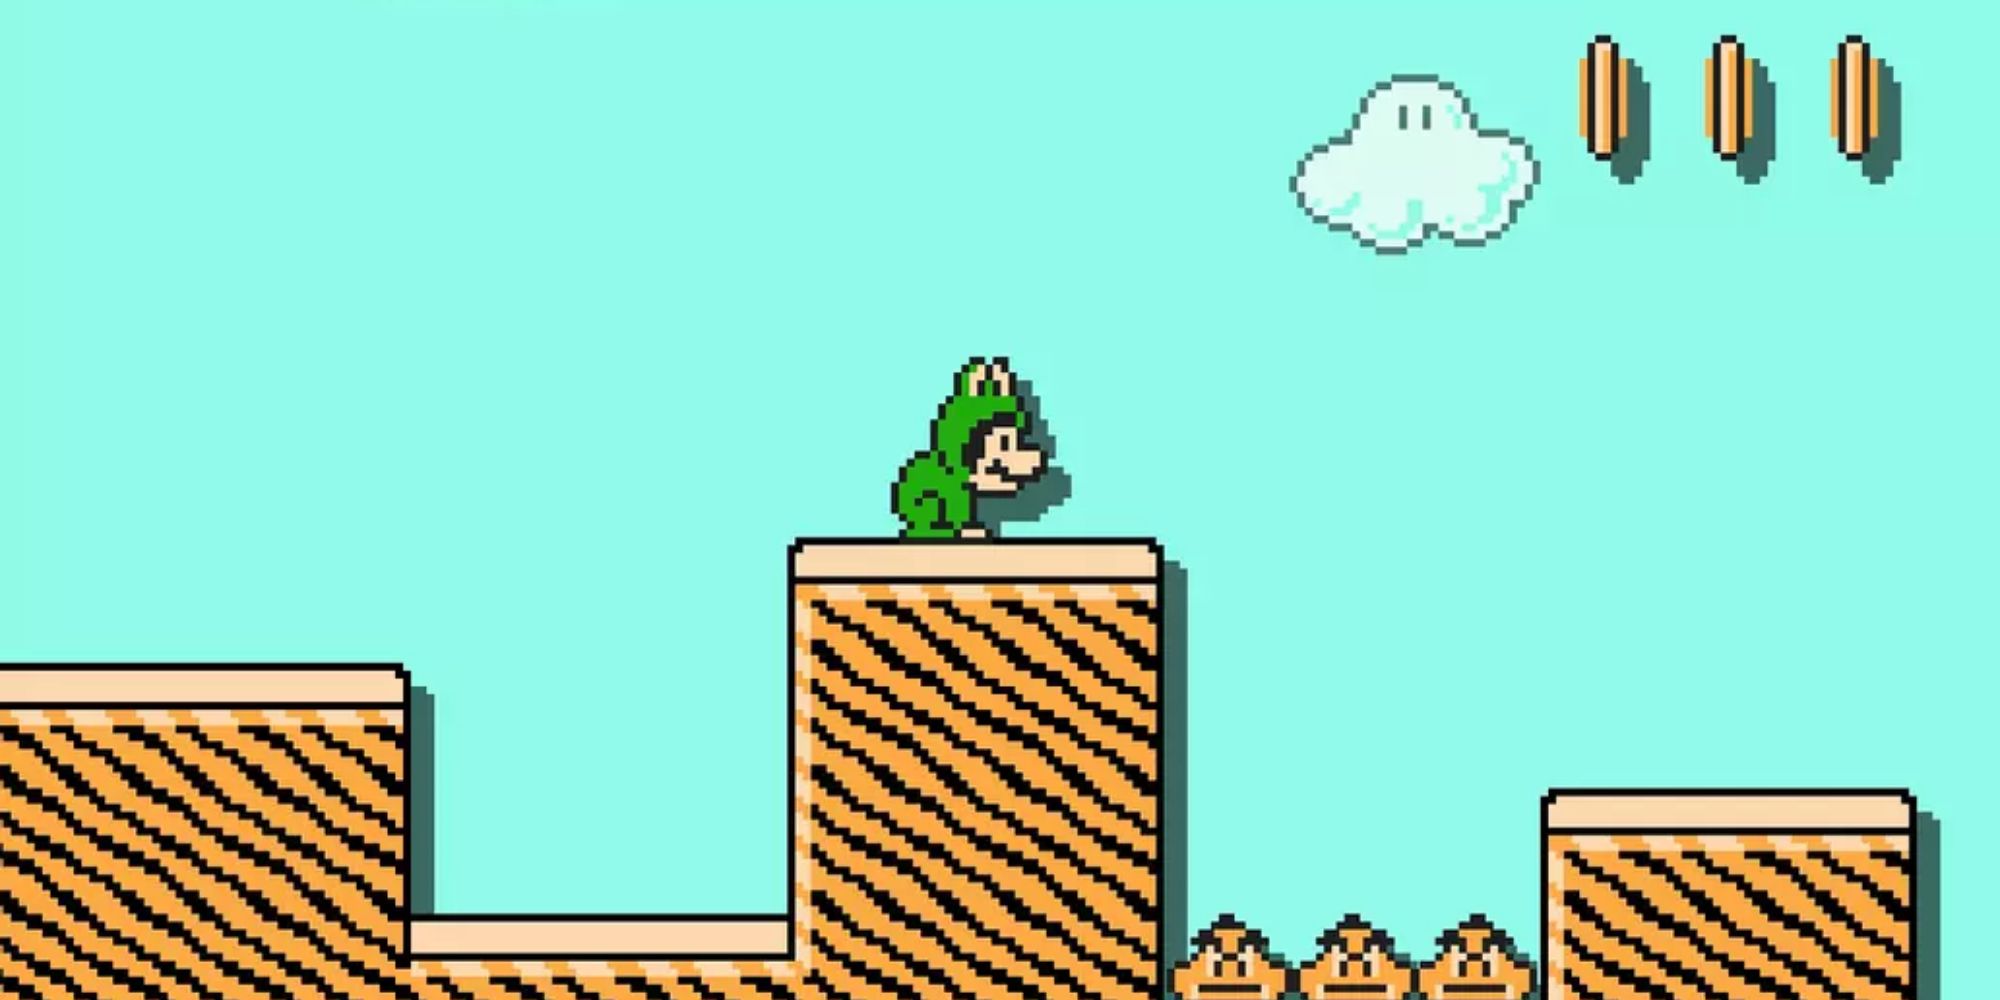 Frog Mario crouching in front of a Goomba pit